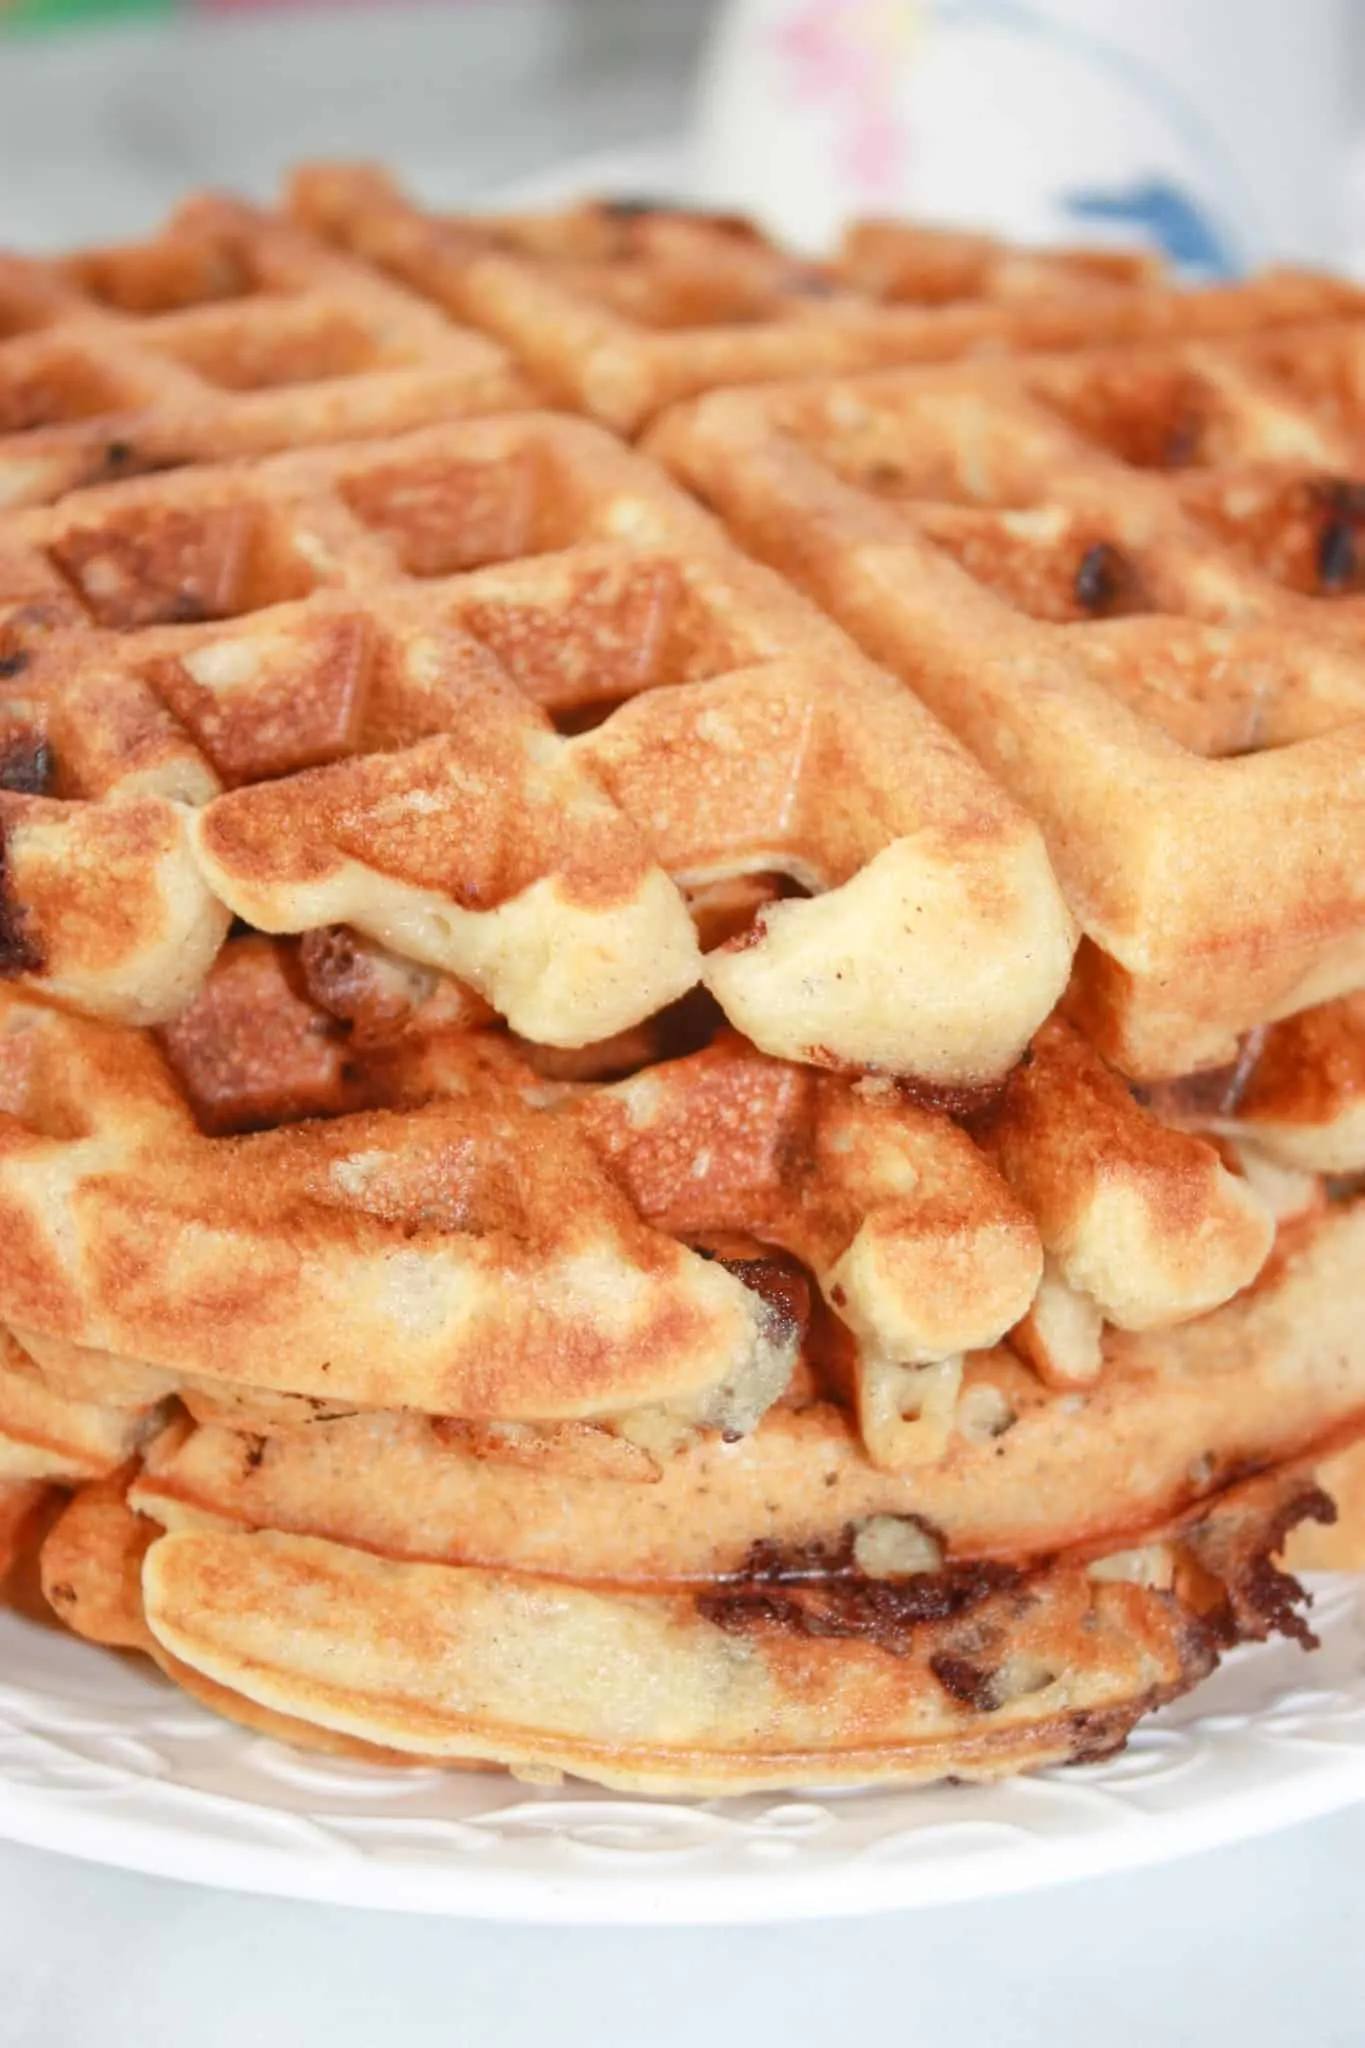 Gluten Free Peanut Butter Chocolate Chip Banana Waffles are loaded with flavour to wake up your taste buds first thing in the morning!